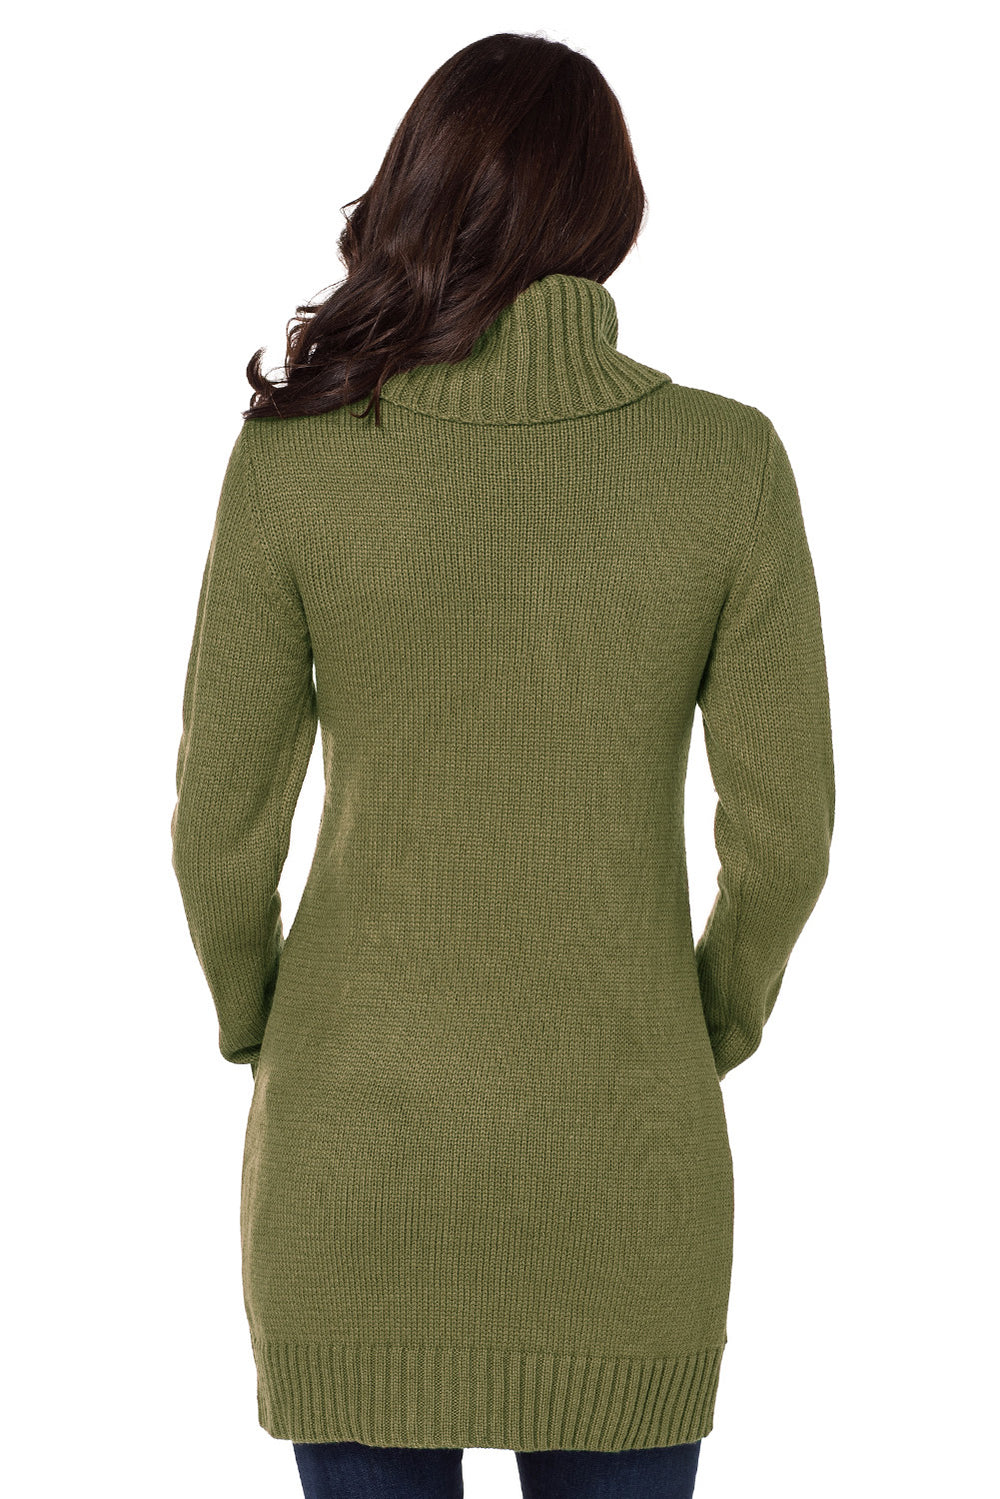  Olive Cowl Neck Pocket Cable Knit Sweater Dress